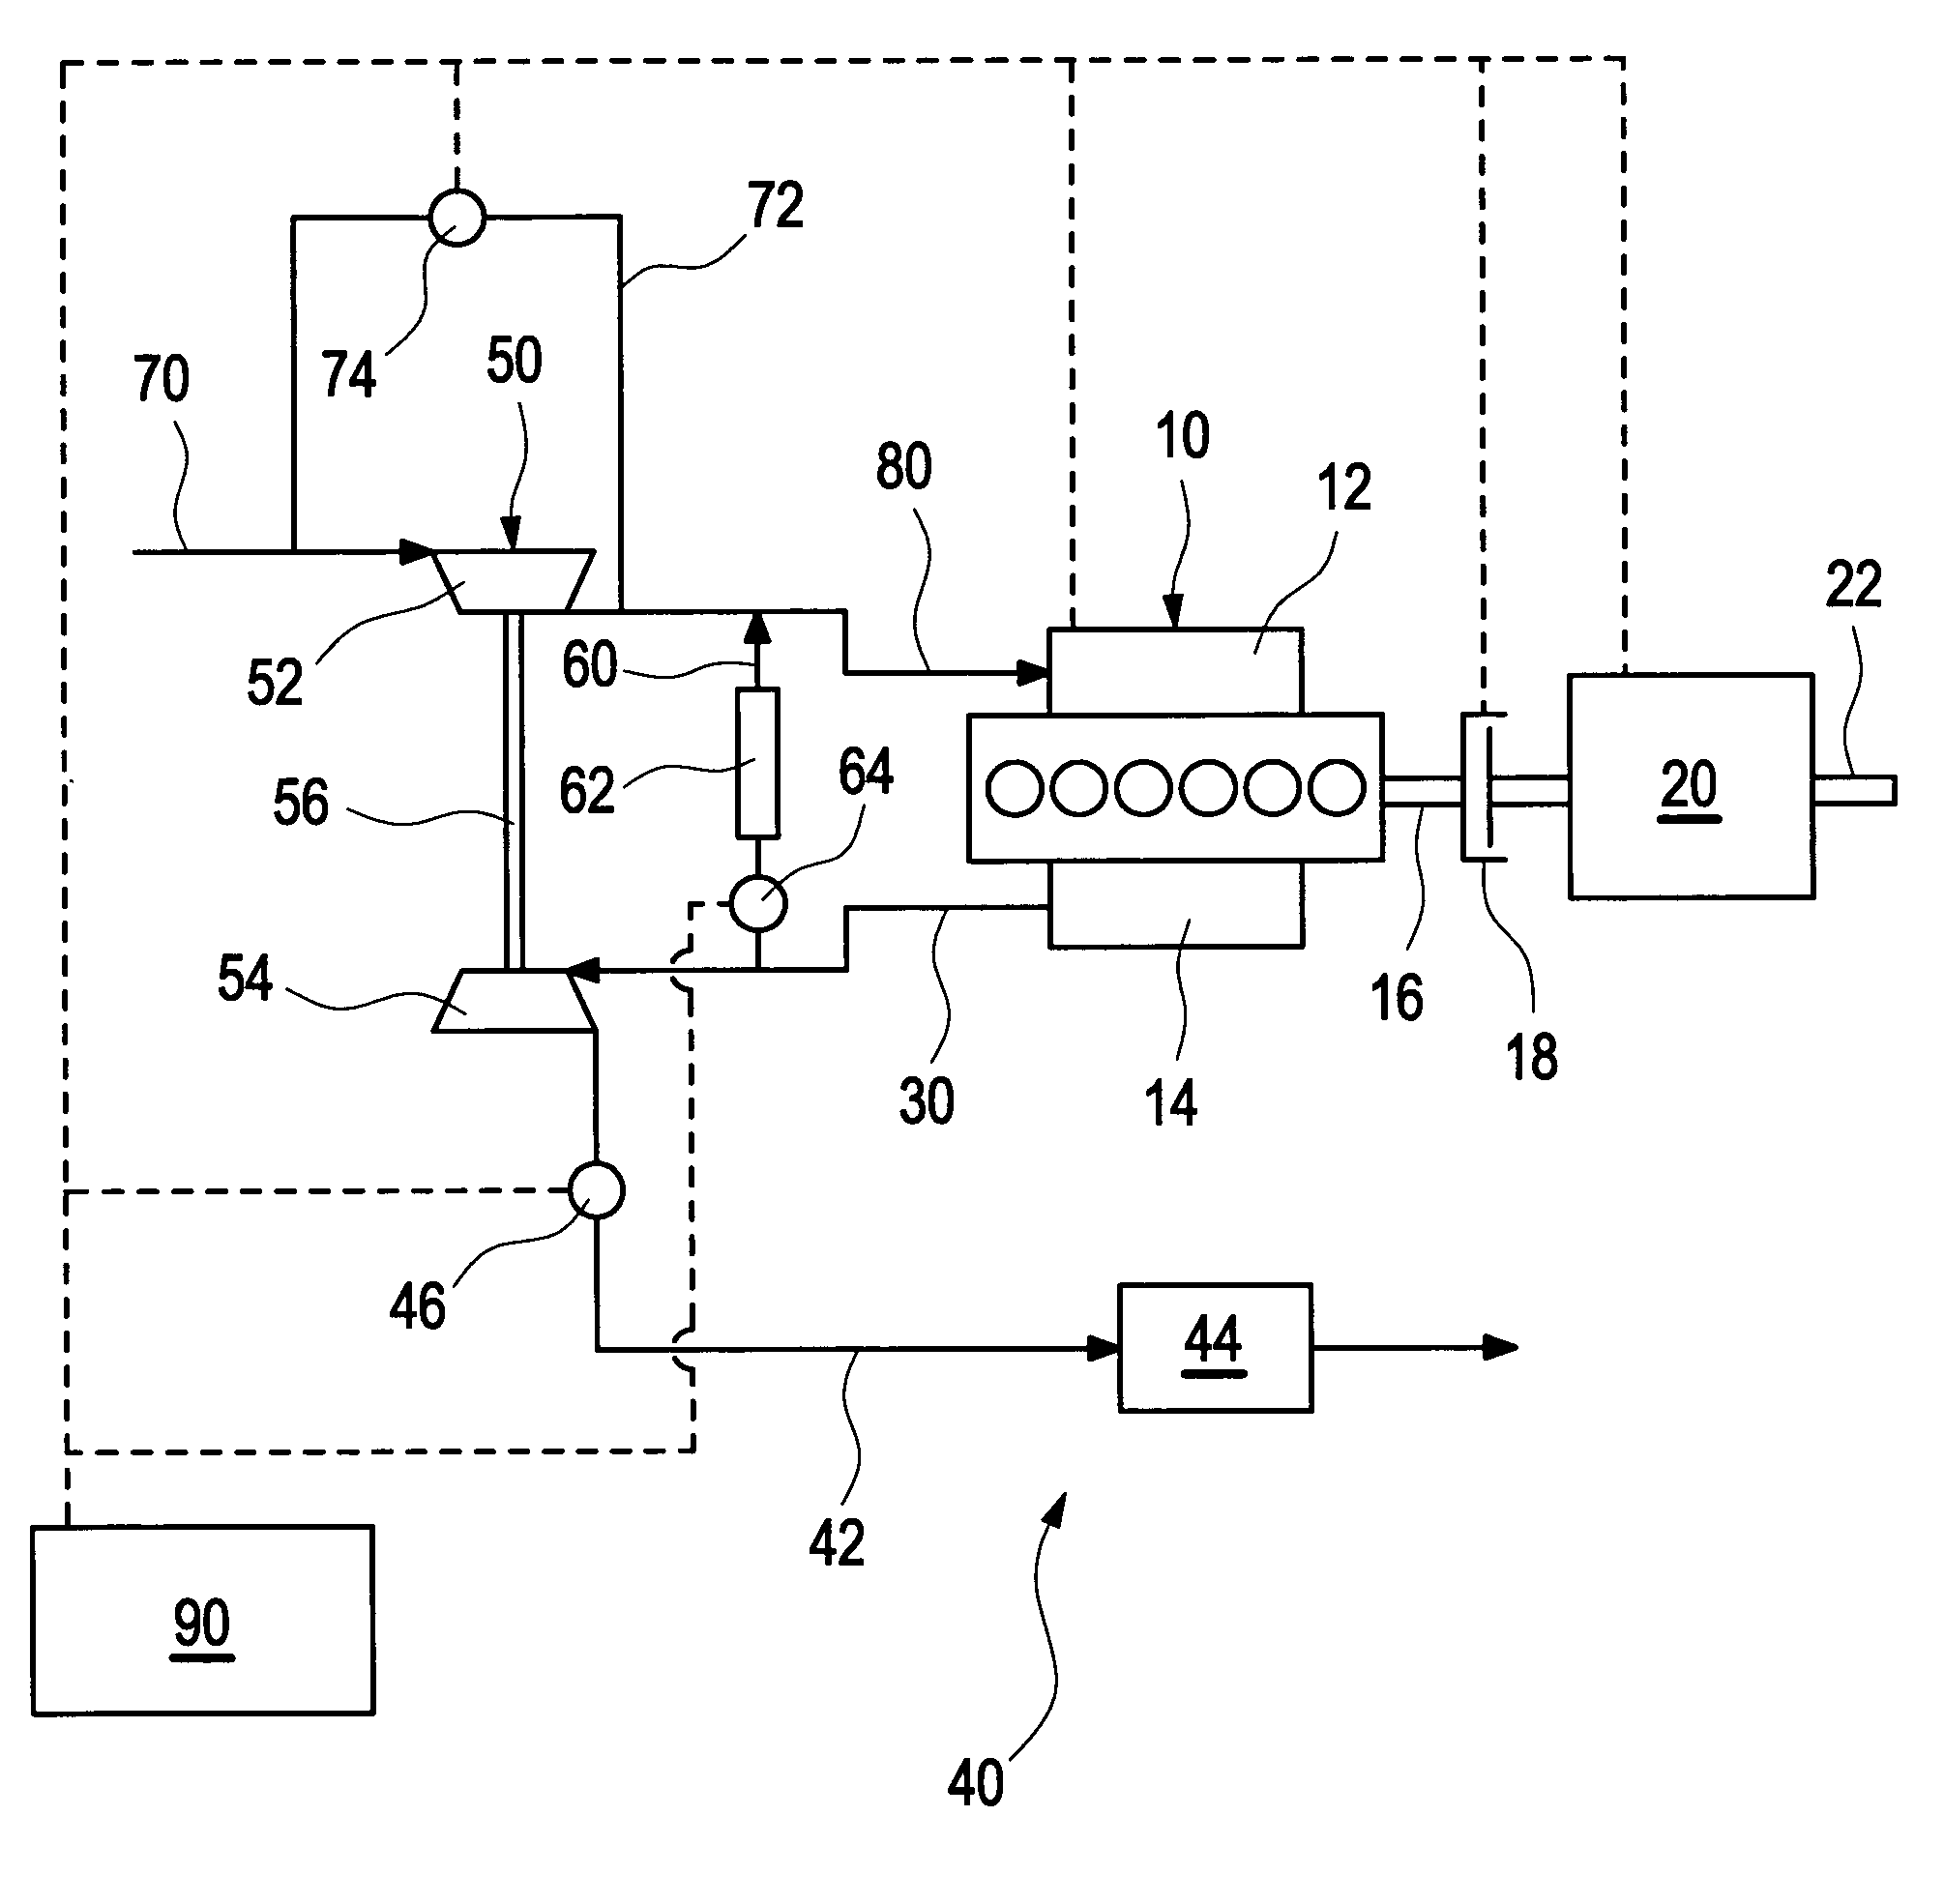 Method for controlling an exhaust gas temperature